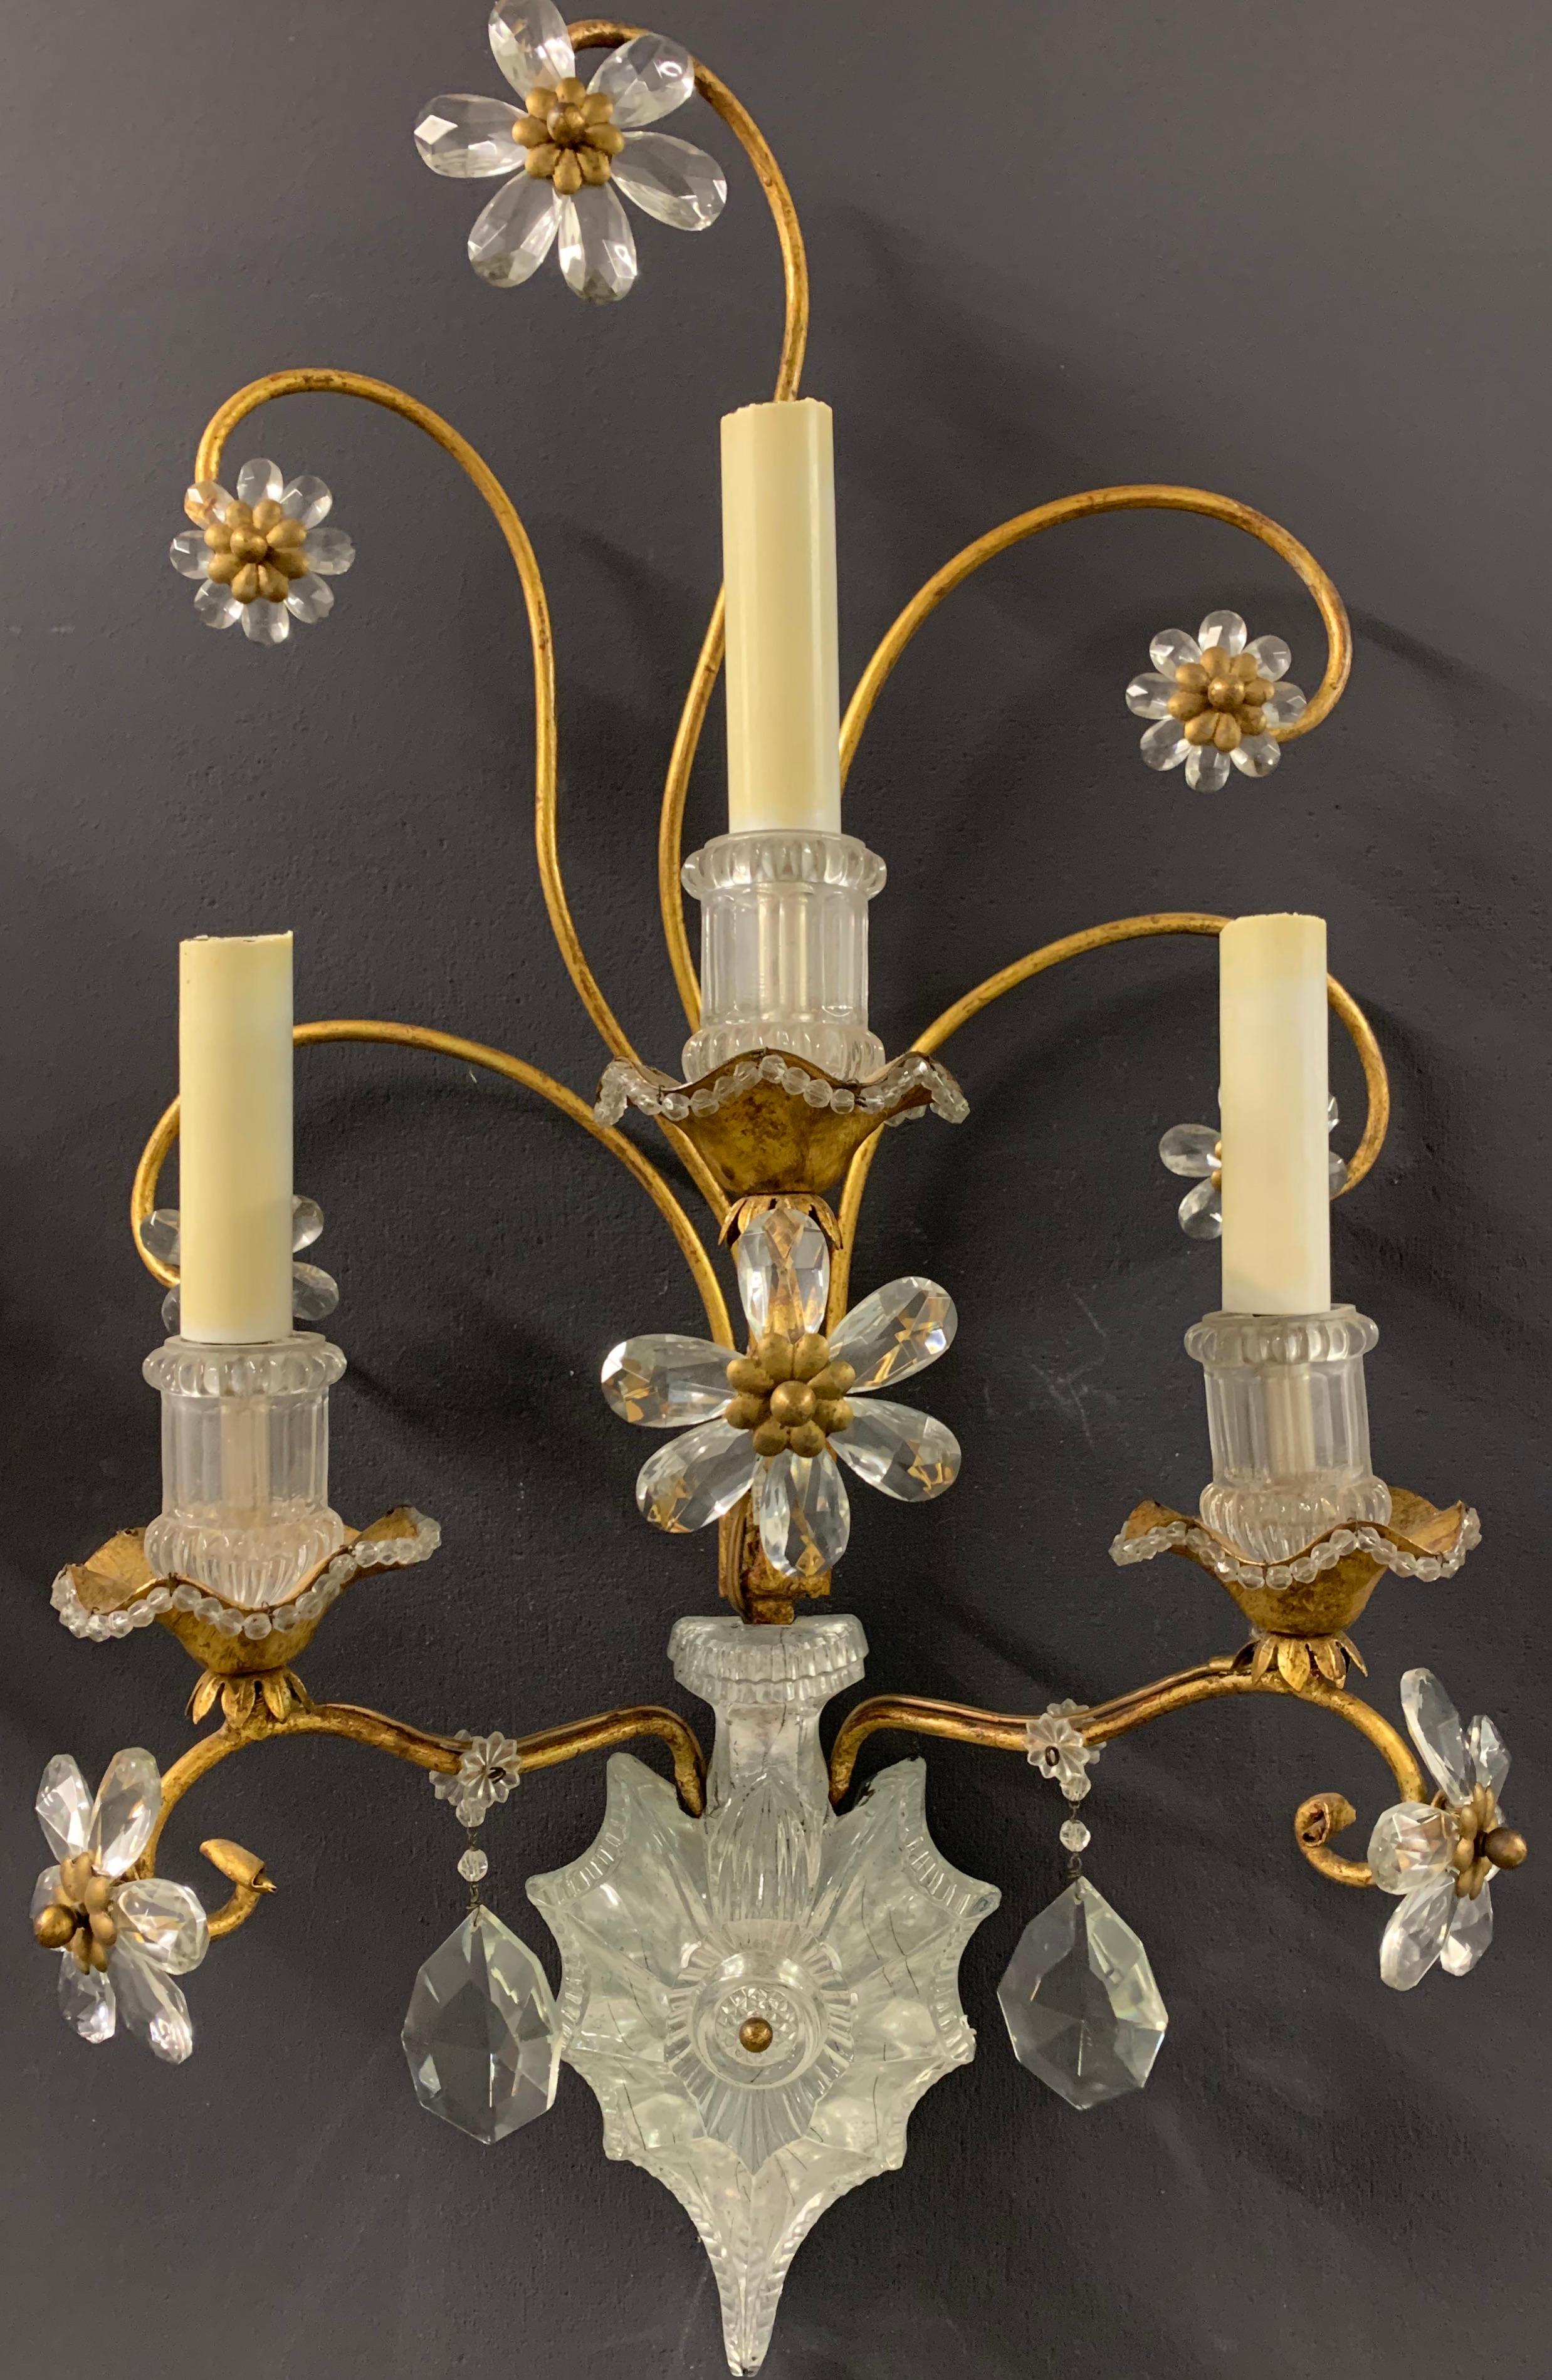 Crystal glass and gilt metal. Handcrafted with amazing details.